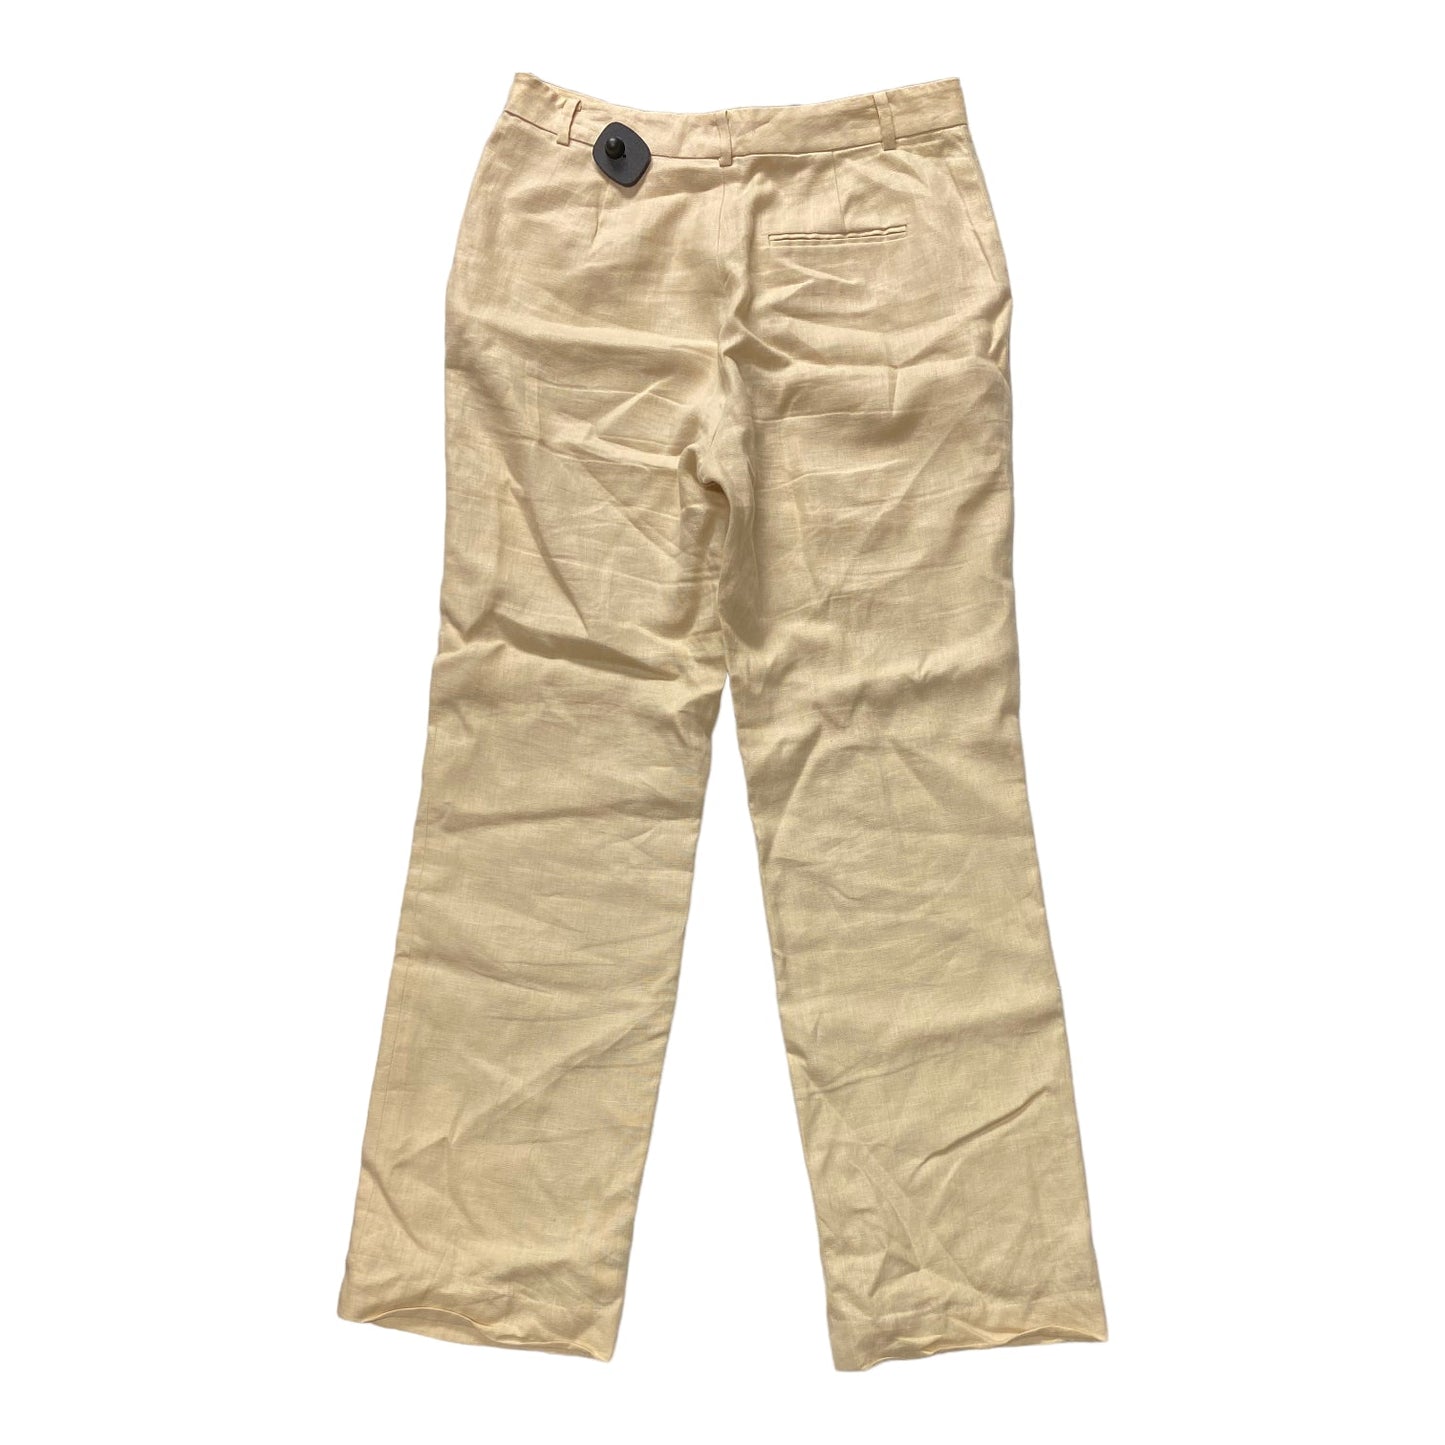 Cream Pants Other Chaps, Size 8